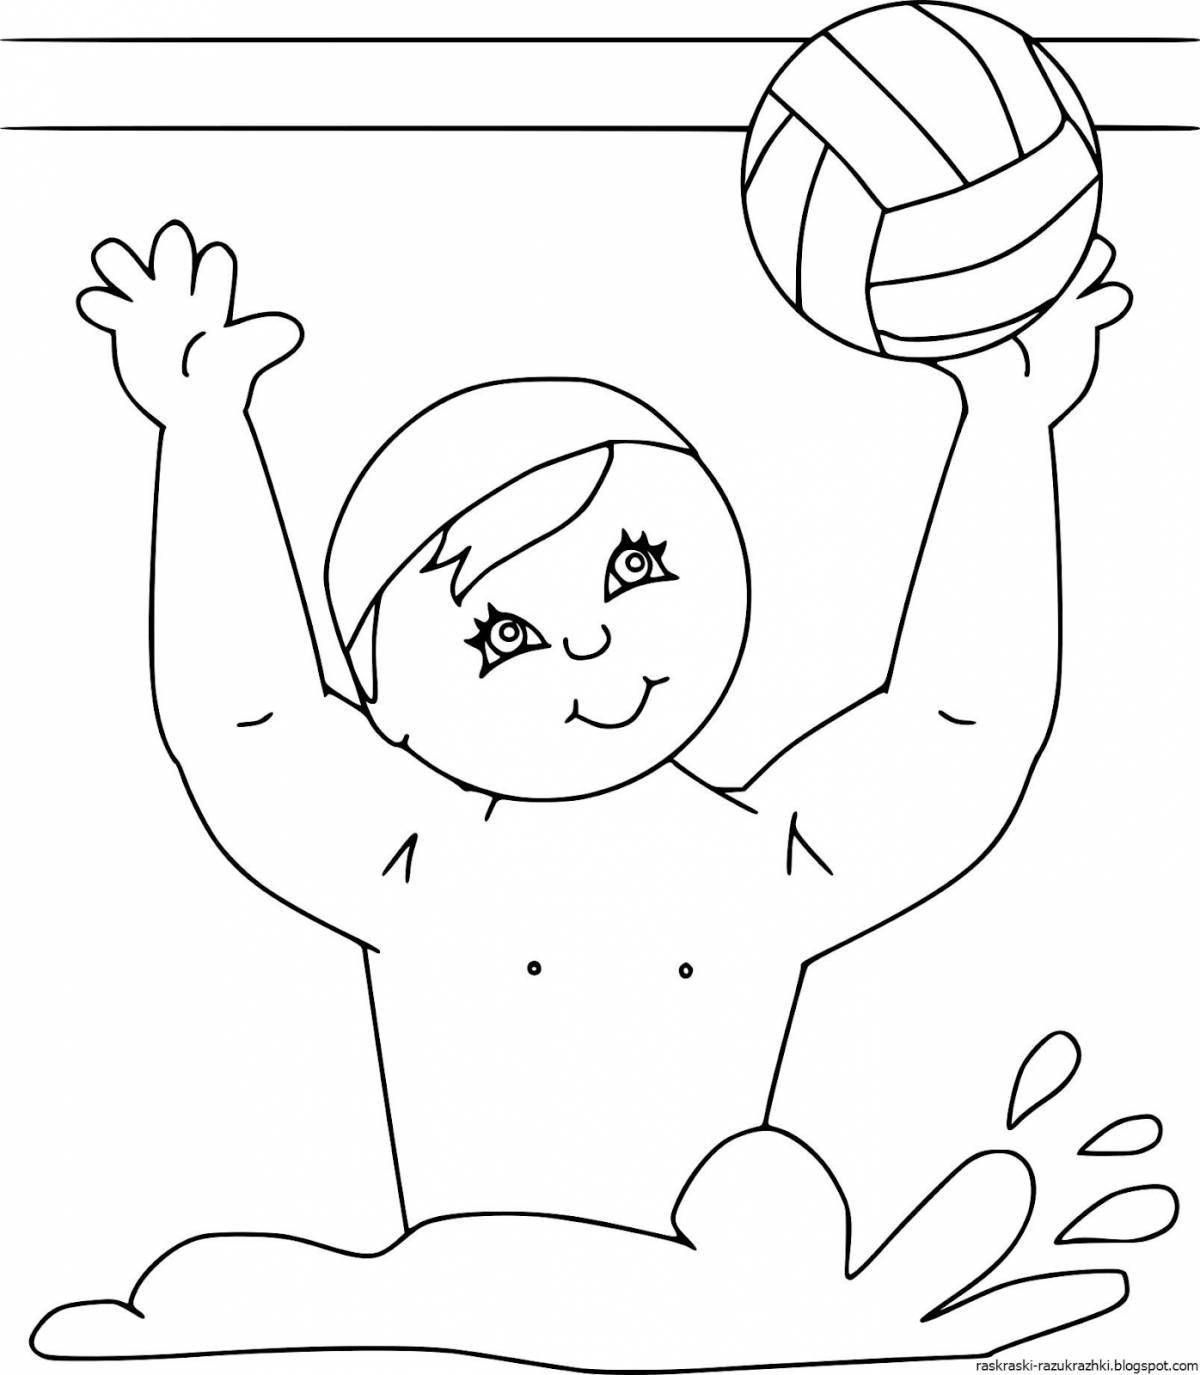 Playful sports coloring book for preschoolers